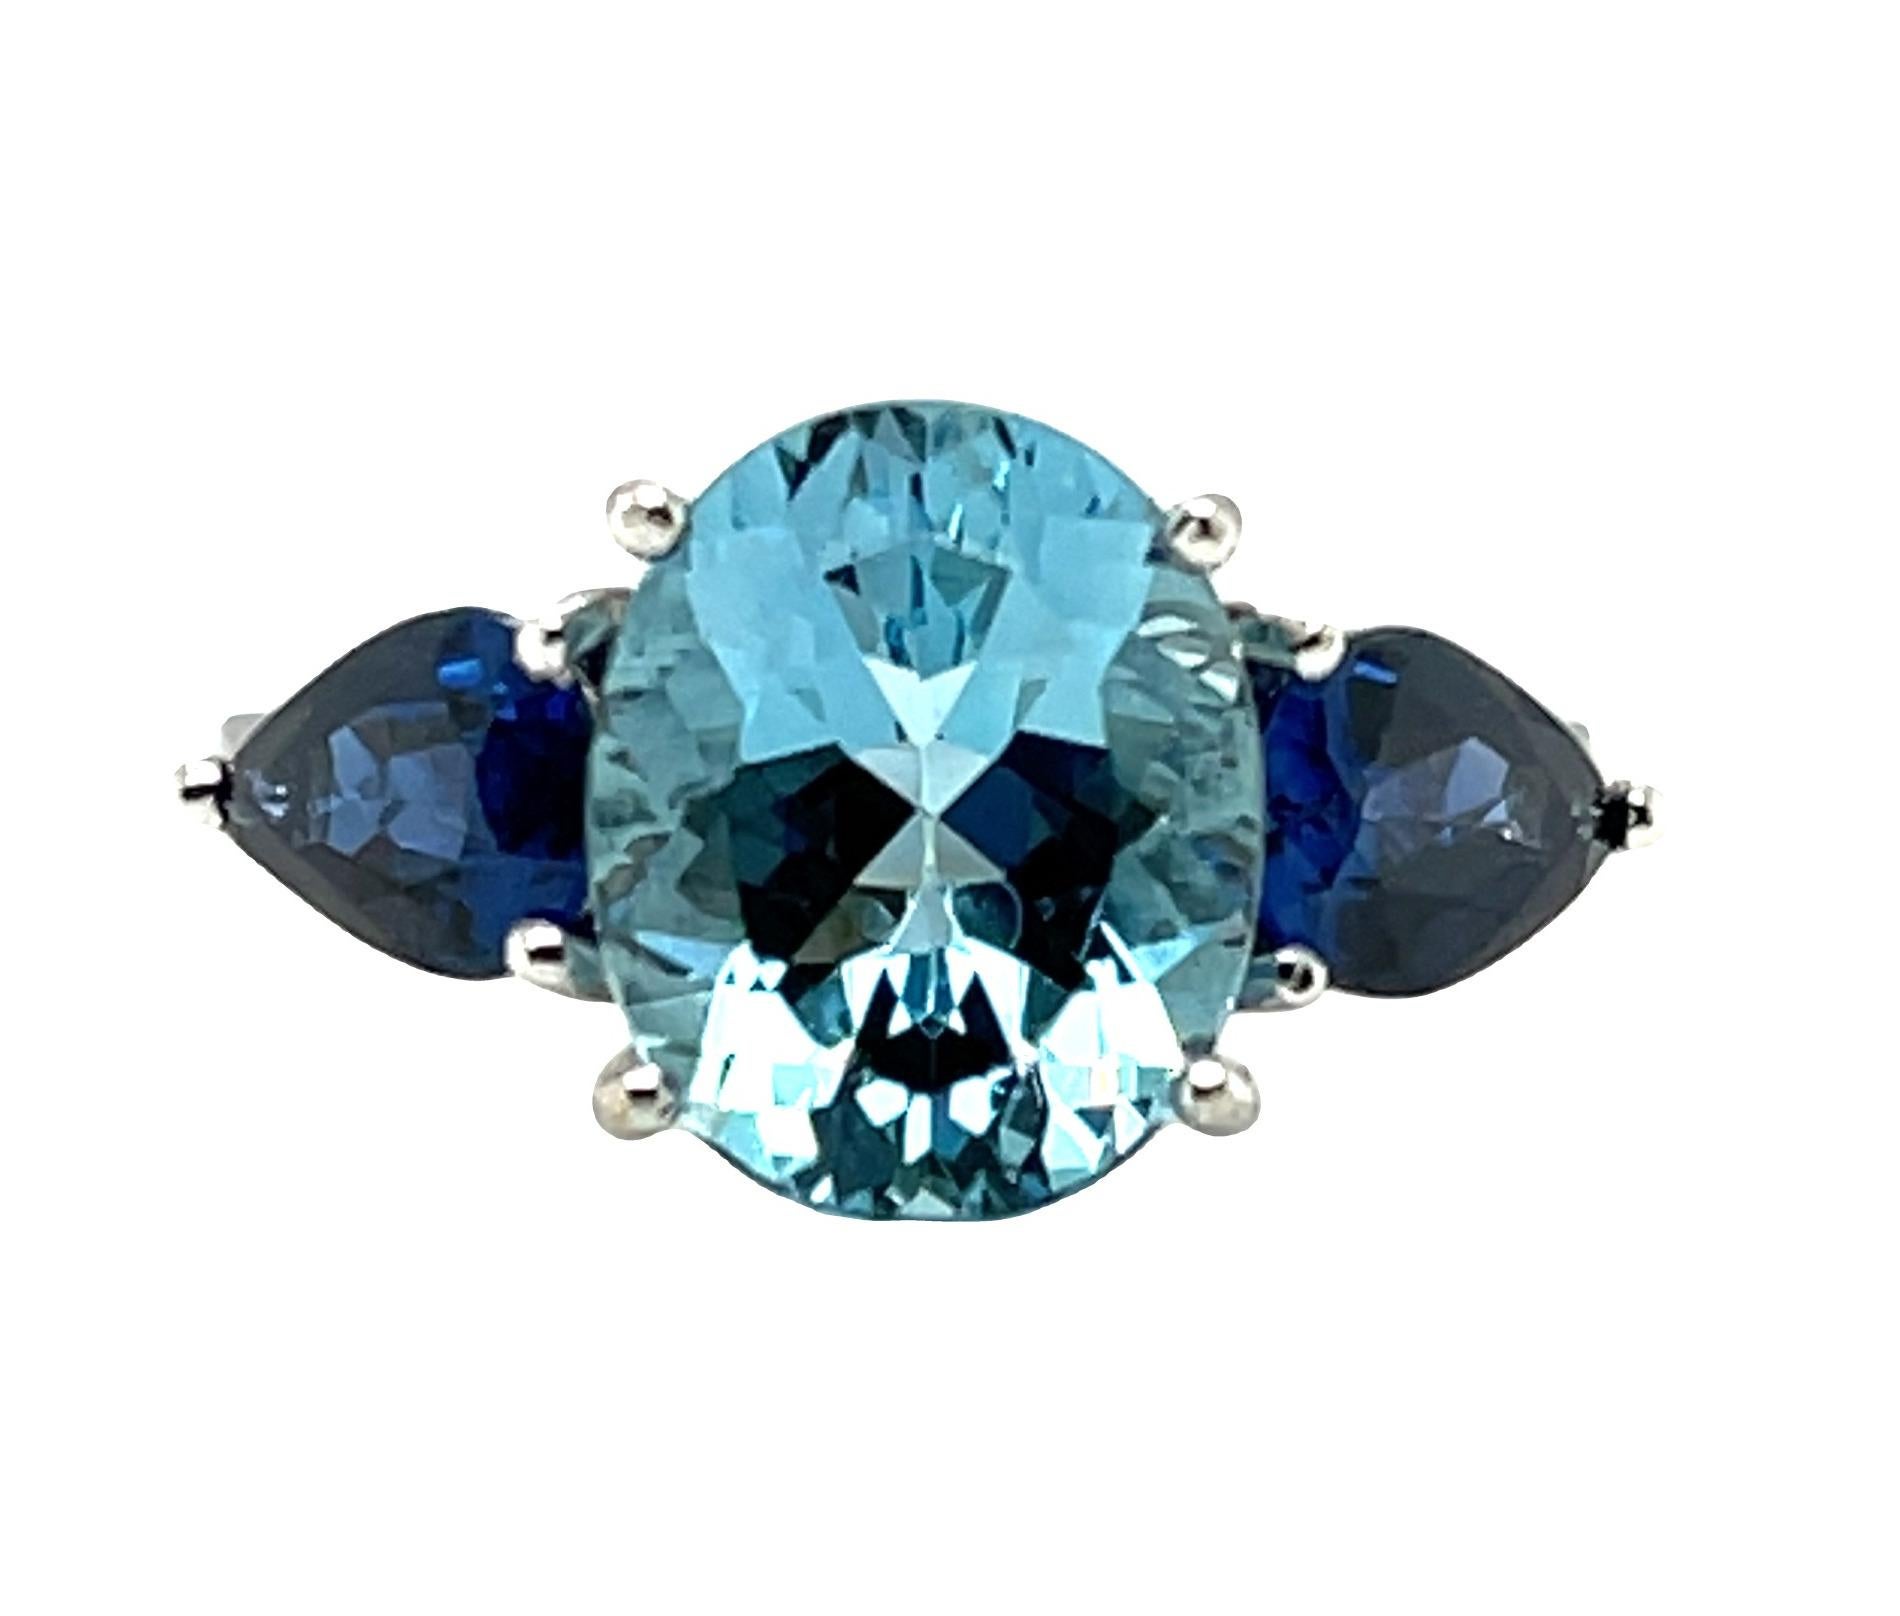 A beautifully vivid aquamarine with bright, rich color and exceptional brilliance is featured in this gorgeous ring. Aquamarines with such deep color are quite rare, especially in such a well-cut and well-proportioned gem. Two lively, beautiful blue